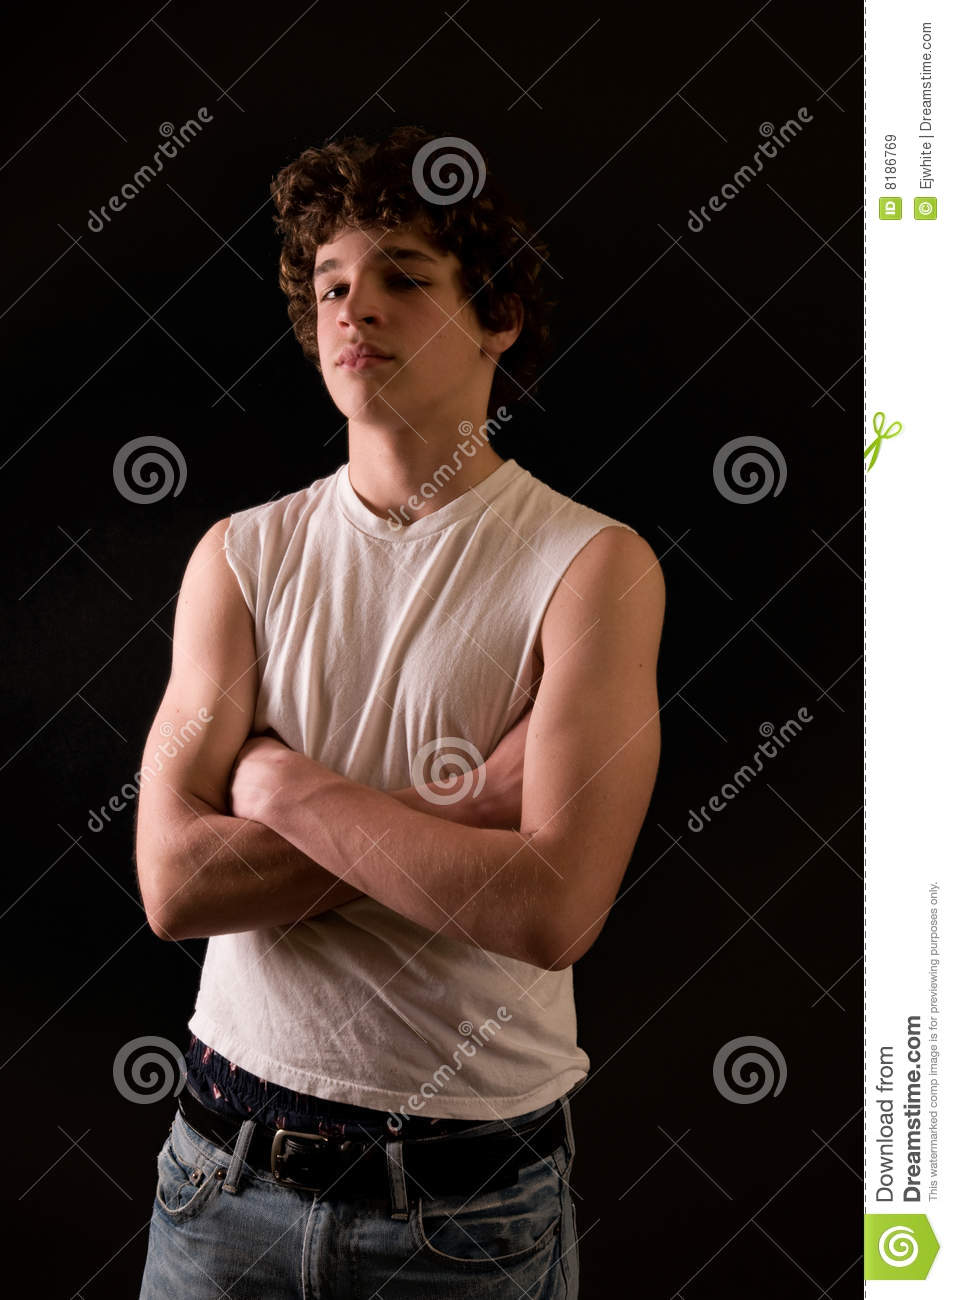 Portrait Of Athletic 13 Year Old Boy With Arms Crossed Looking Defiant